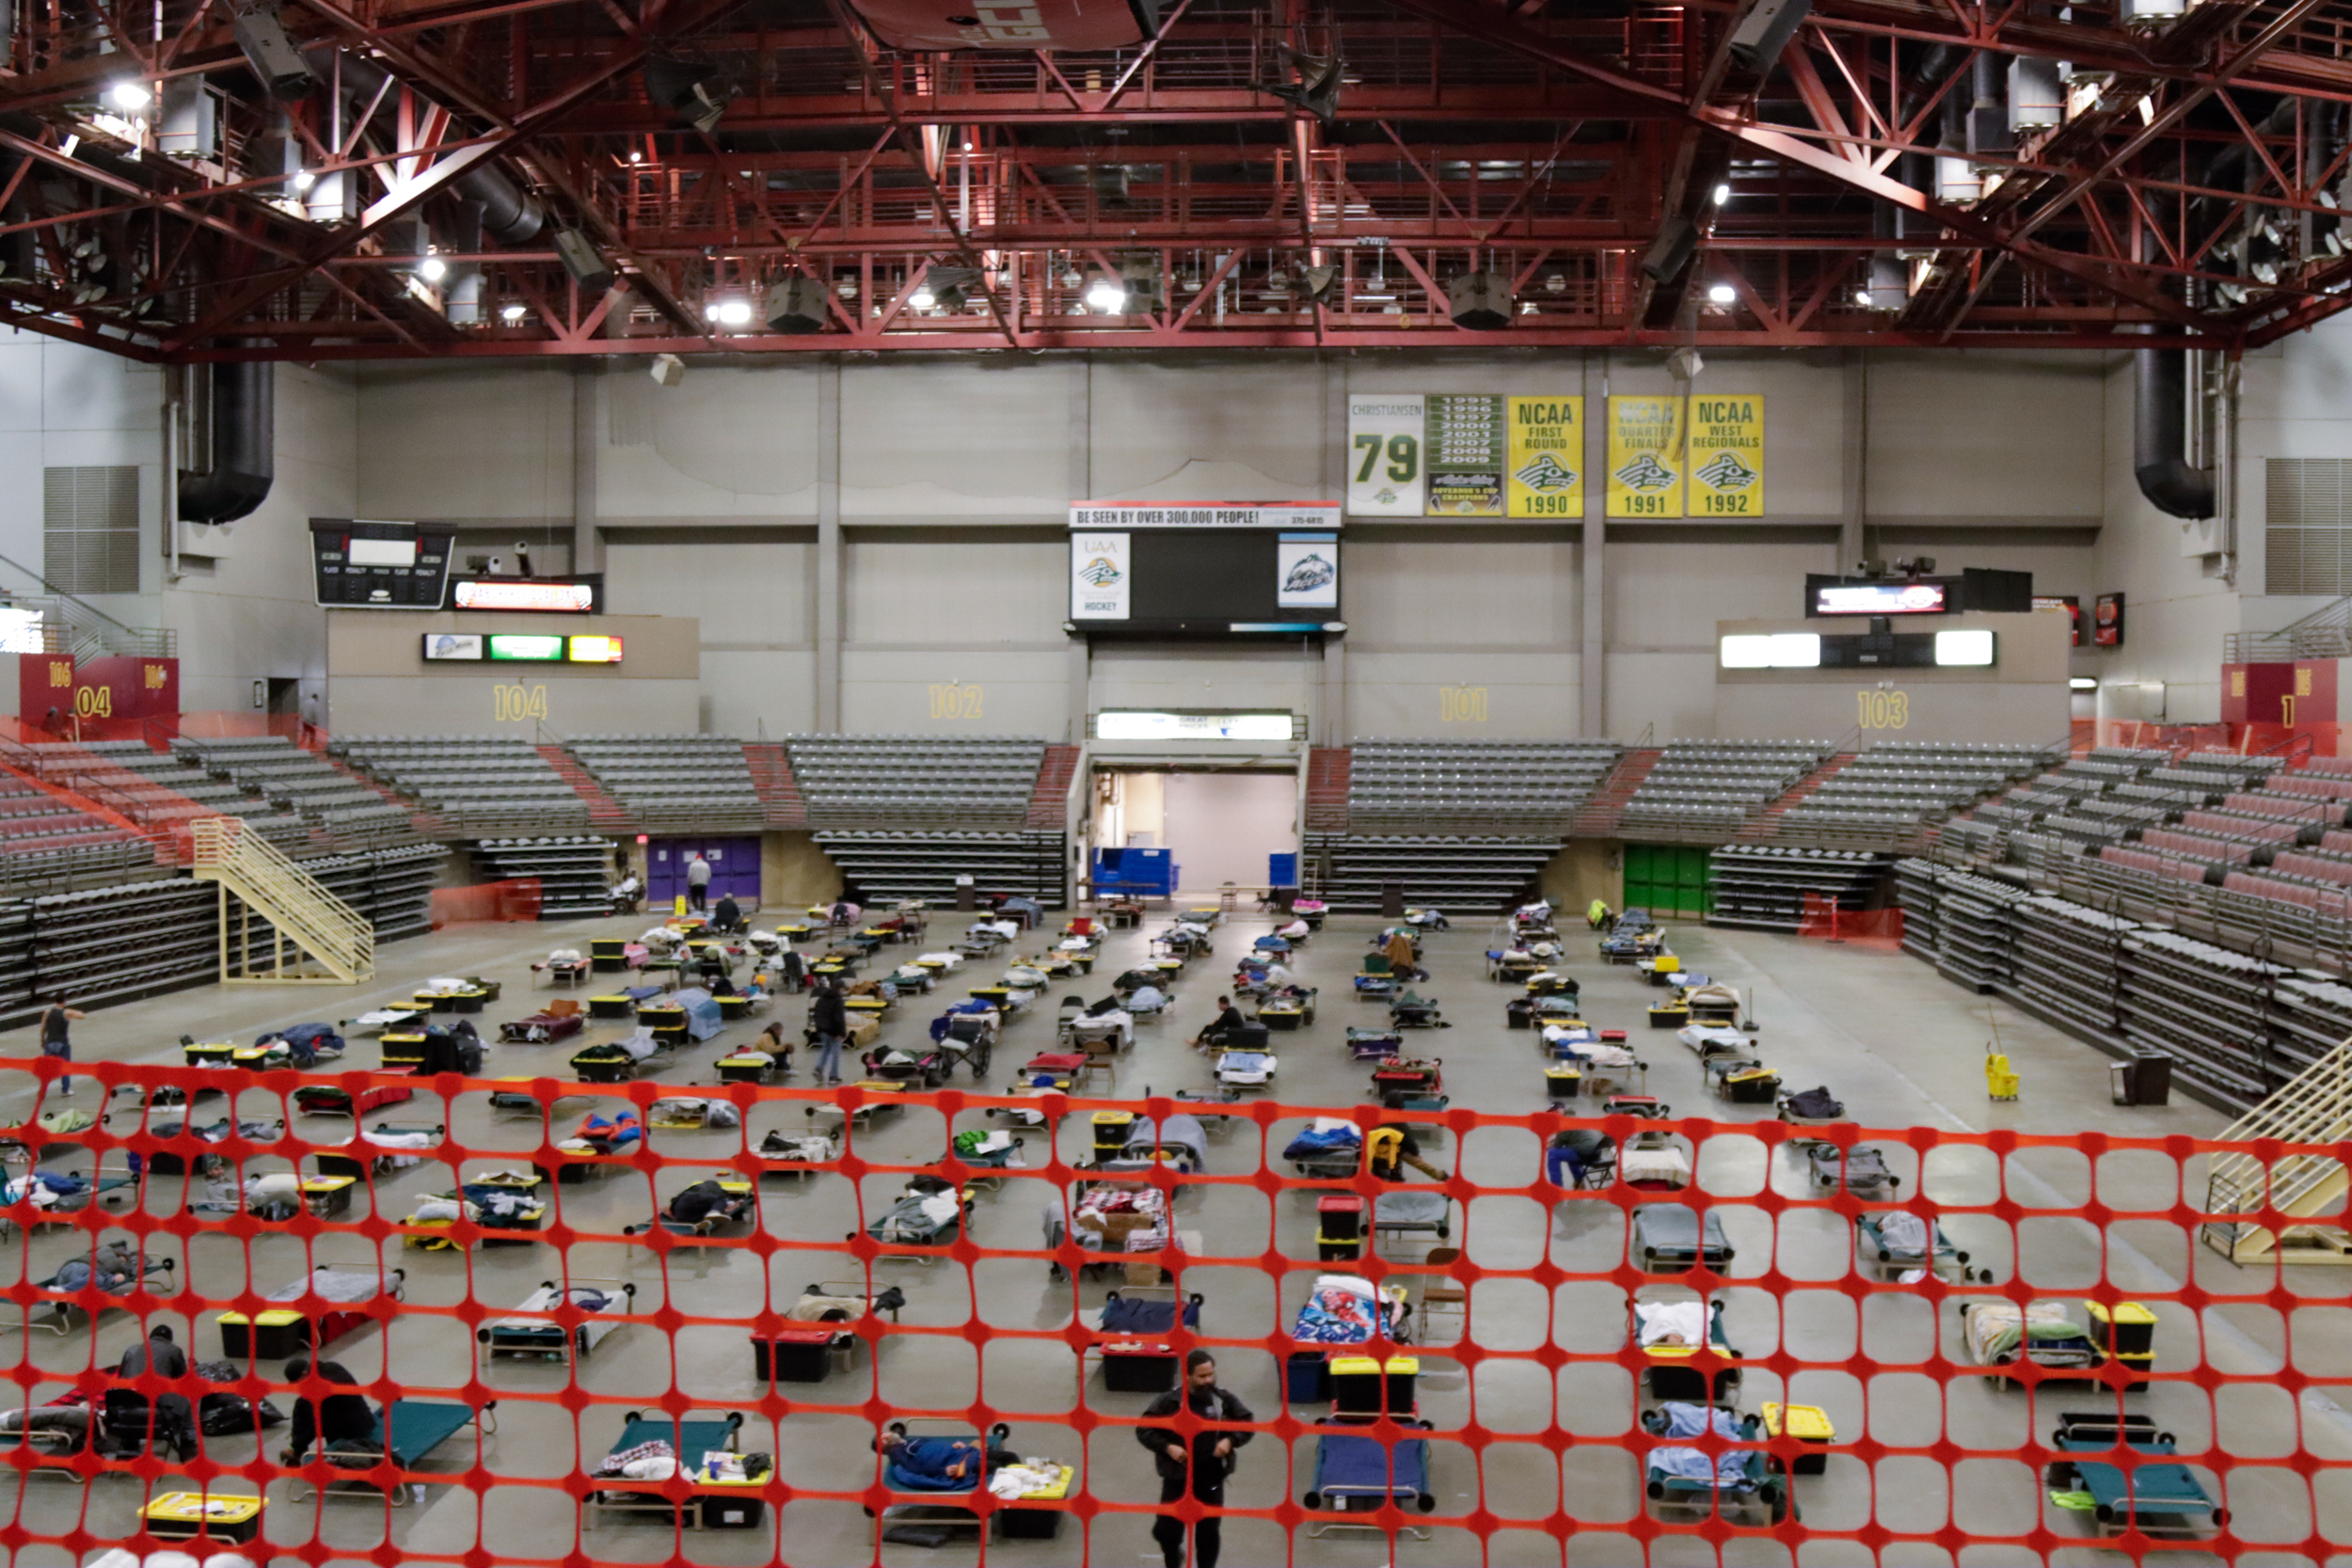 Rows of cots are organized on the floor of an arena.